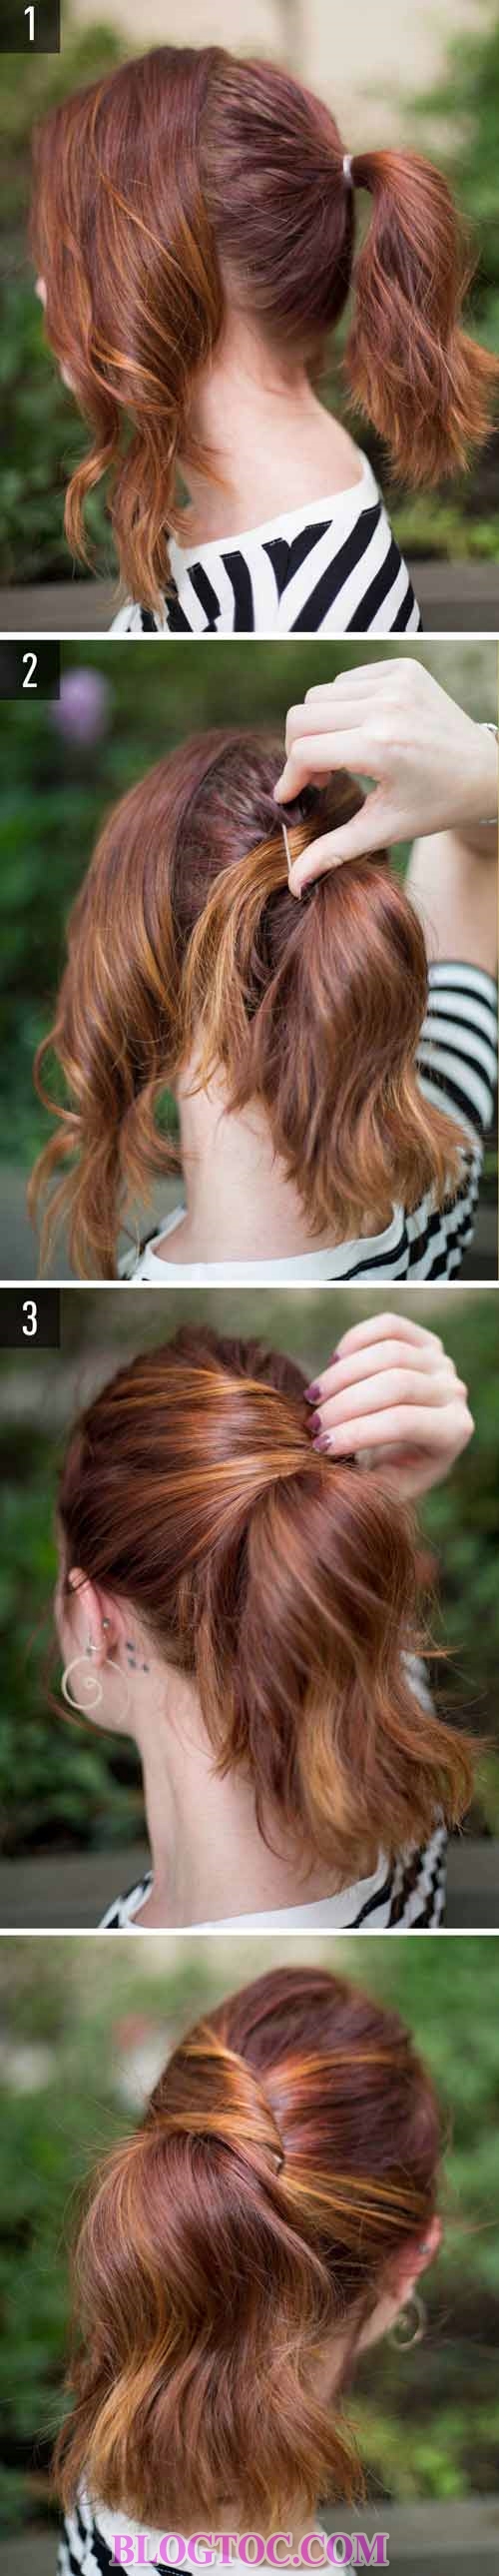 Simple beautiful hairstyles you can make at home with just a little free time 3